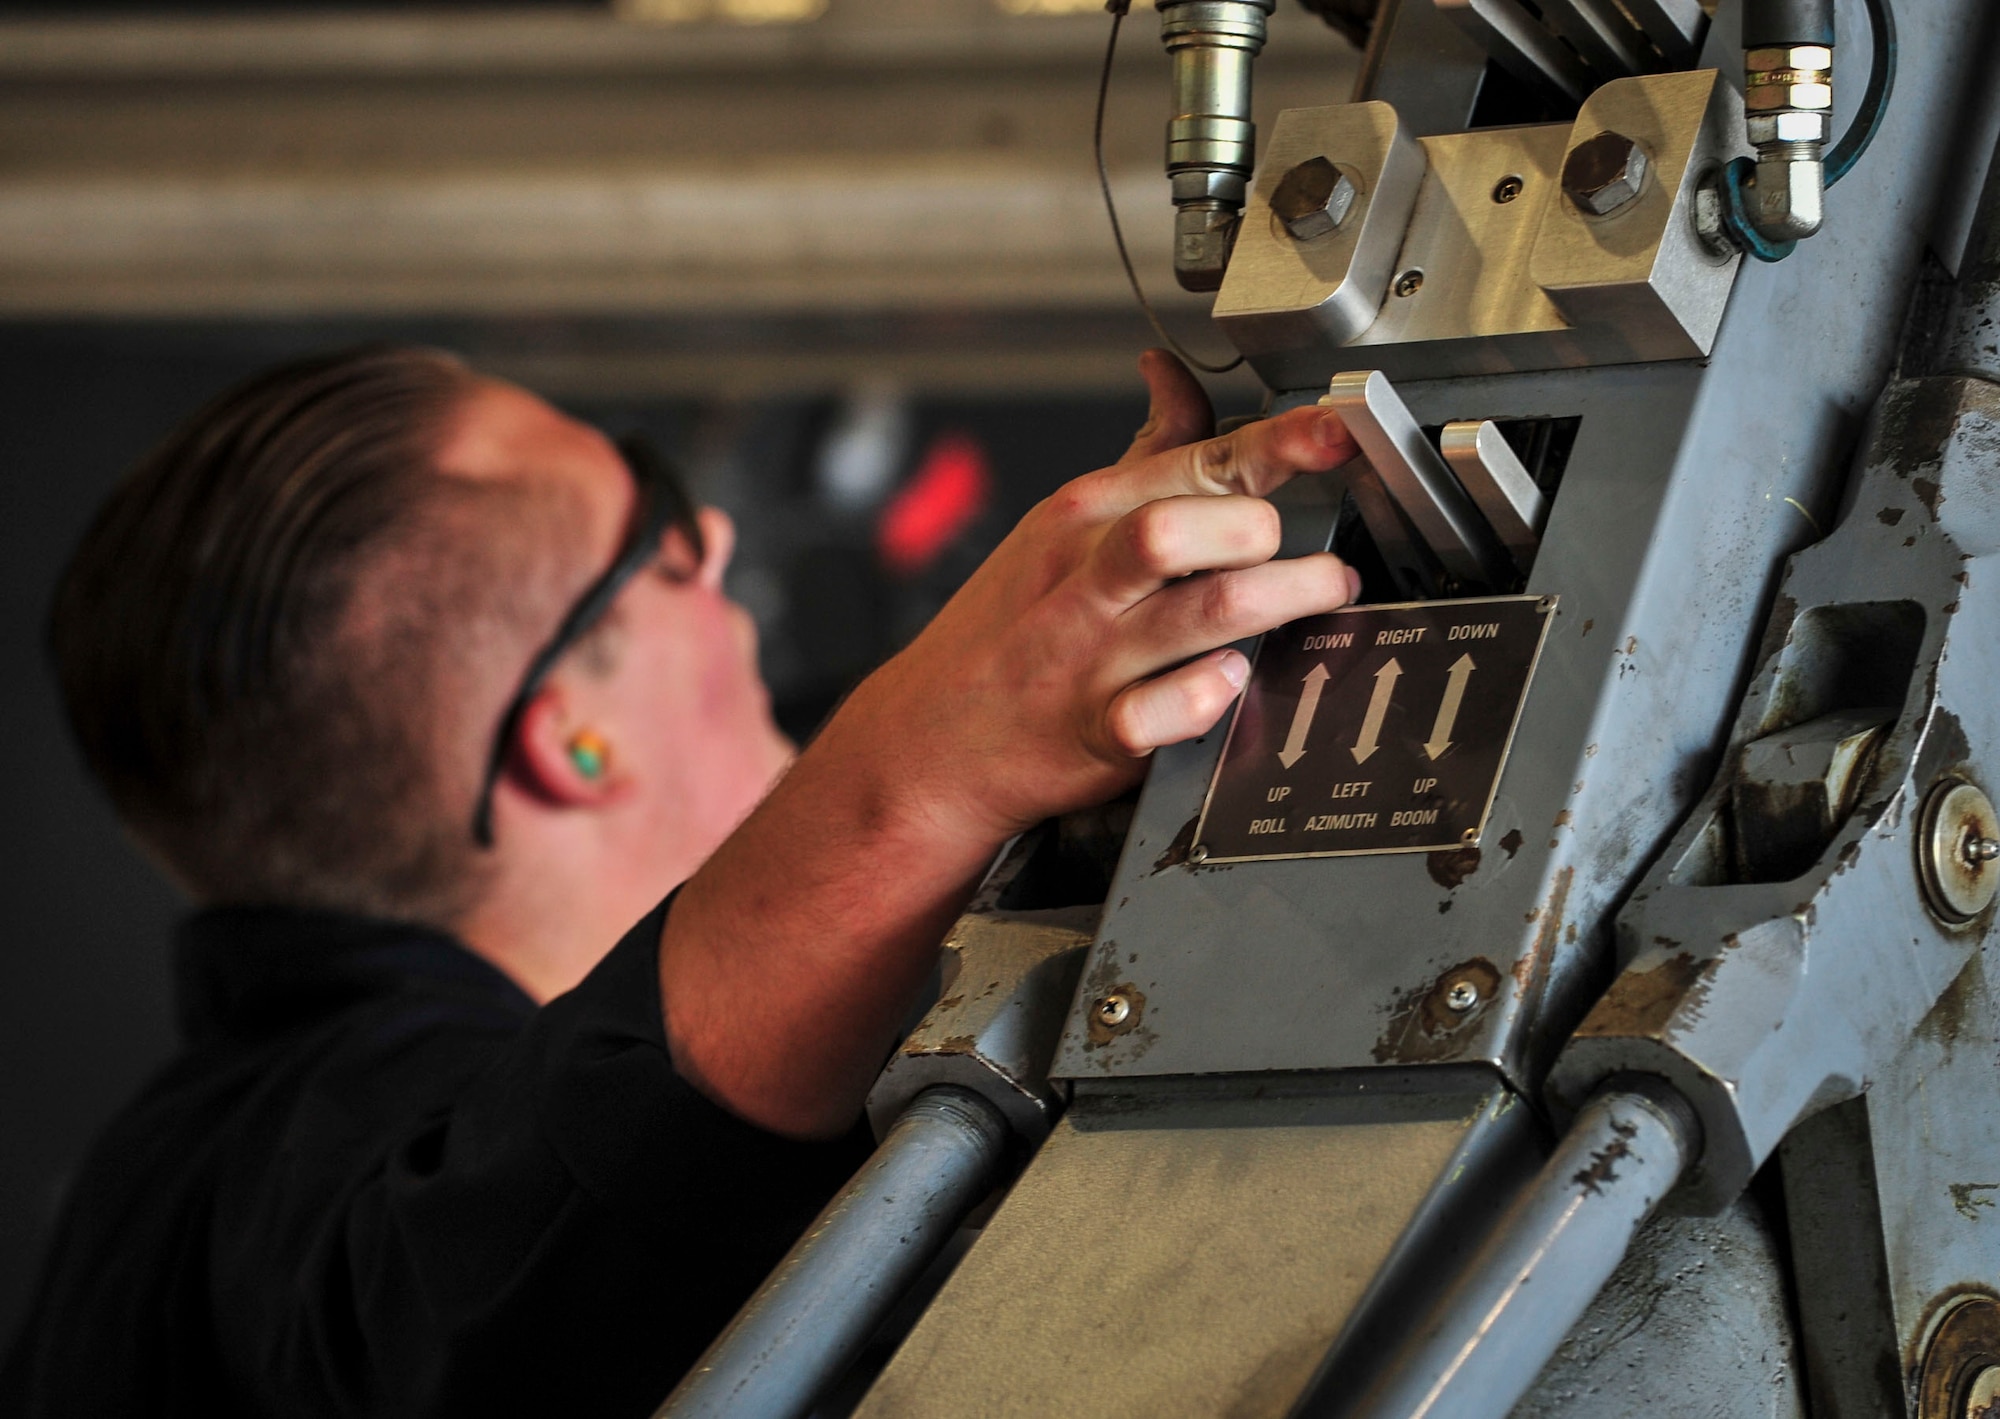 Airman 1st Class James Rutt, 5th Aircraft Maintenance Squadron weapons load crew member, makes fine tuned adjustments to a “jammer” carrying a B-52H Stratofortress weapon system at Minot Air Force Base, N.D., Aug. 24, 2015. Rutt and his team were required to load four weapons onto the aircraft as part of Air Force Global Strike Command’s Global Strike Challenge Competition and used constant communication to ensure the weapons were loaded quickly, safely and effectively. (U.S. Air Force photo/Senior Airman Stephanie Morris)